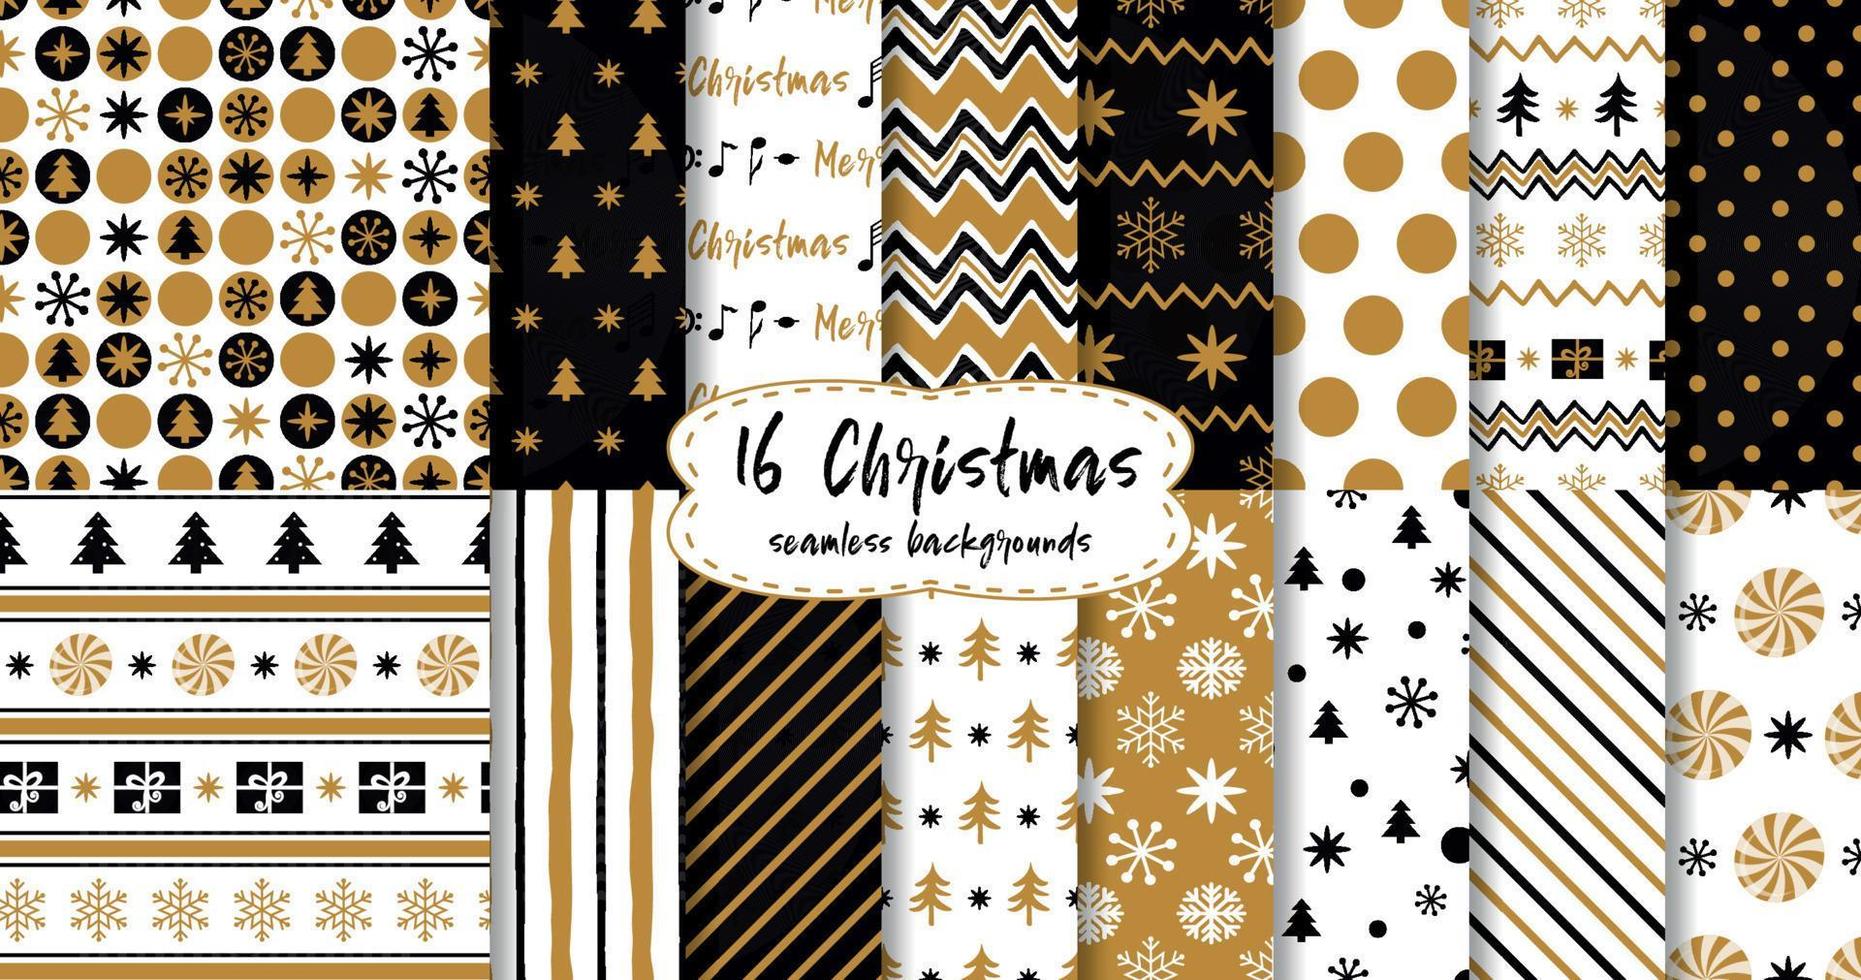 Merry Christmas and Happy New Year Set of gold golden black seamless backgrounds with holiday symbols candy sweets trees snowflakes christmas ball gift abstract hipster patterns Vector collection